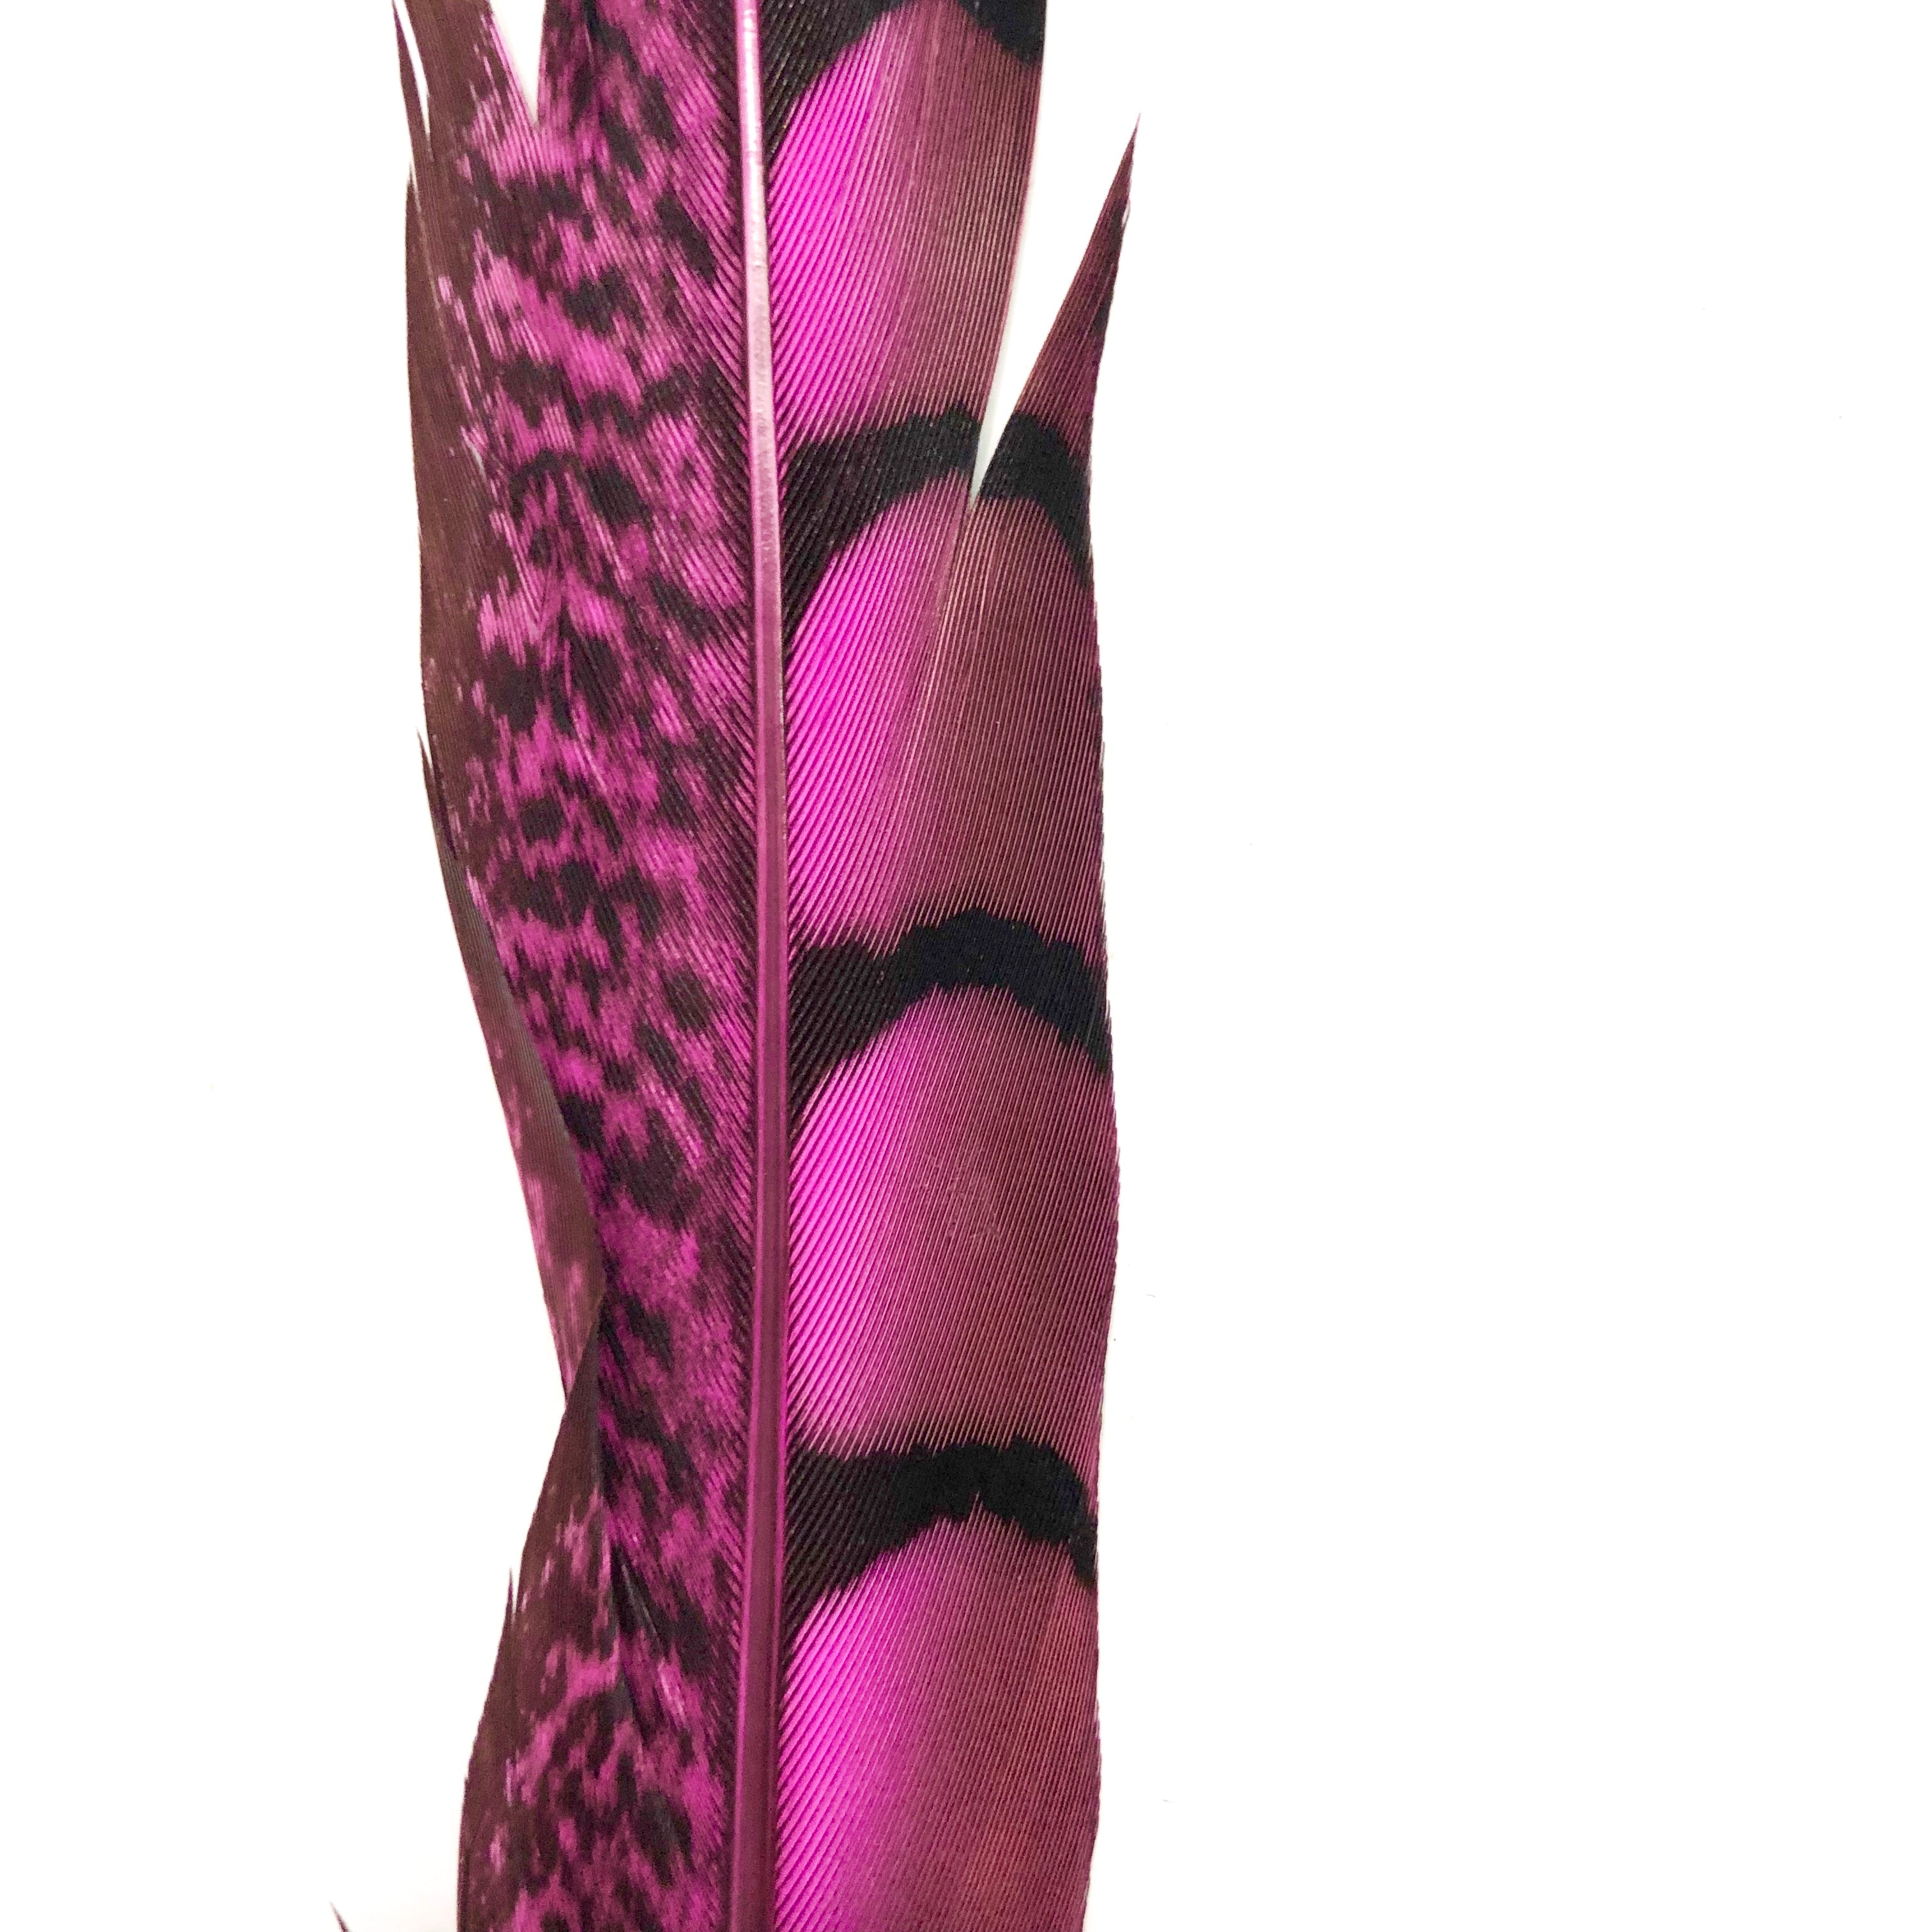 10" to 20" Lady Amherst Pheasant Side Tail Feather - Hot Pink ((SECONDS))